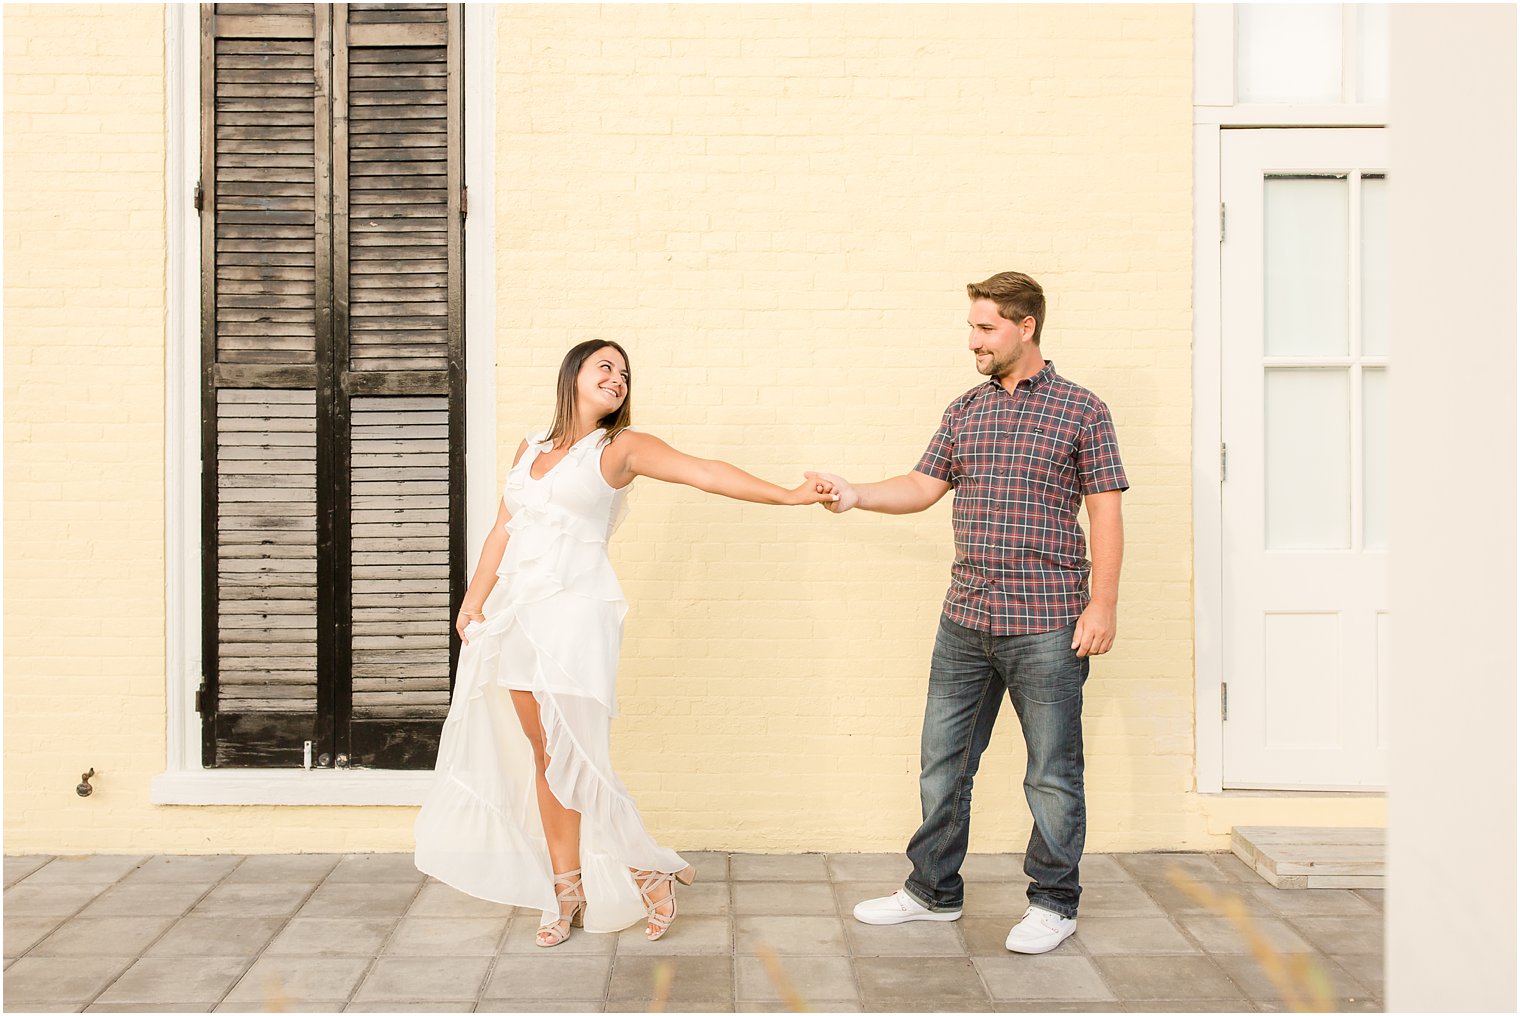 Twirling photos during engagement session